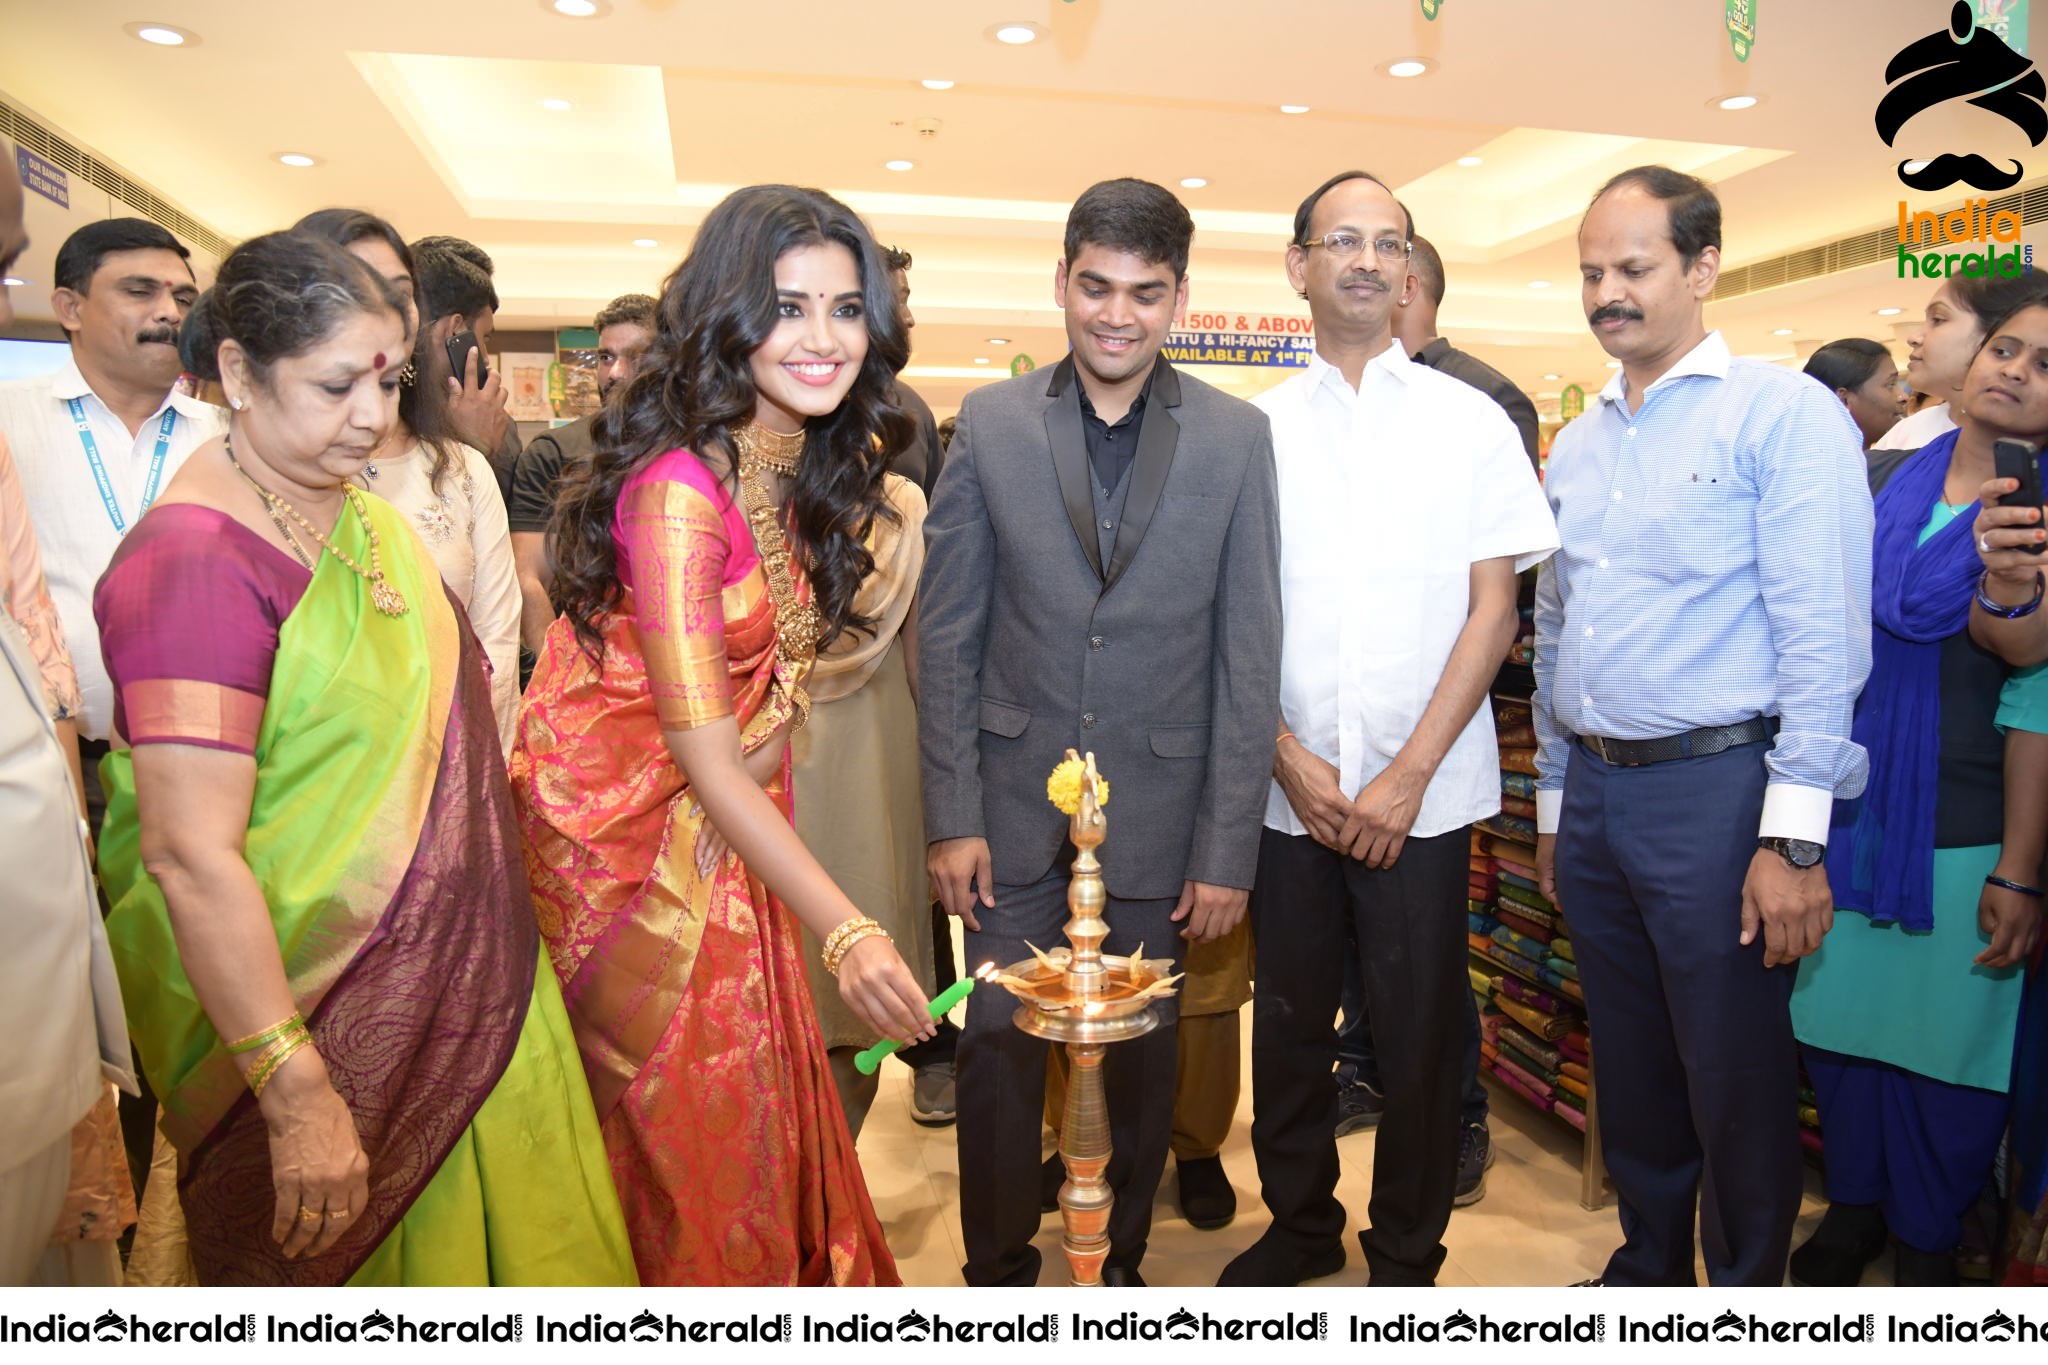 Anutex Shopping Mall Grand Festival Prizes And Collection Launched By Actress Anupama Parameswaran Set 1